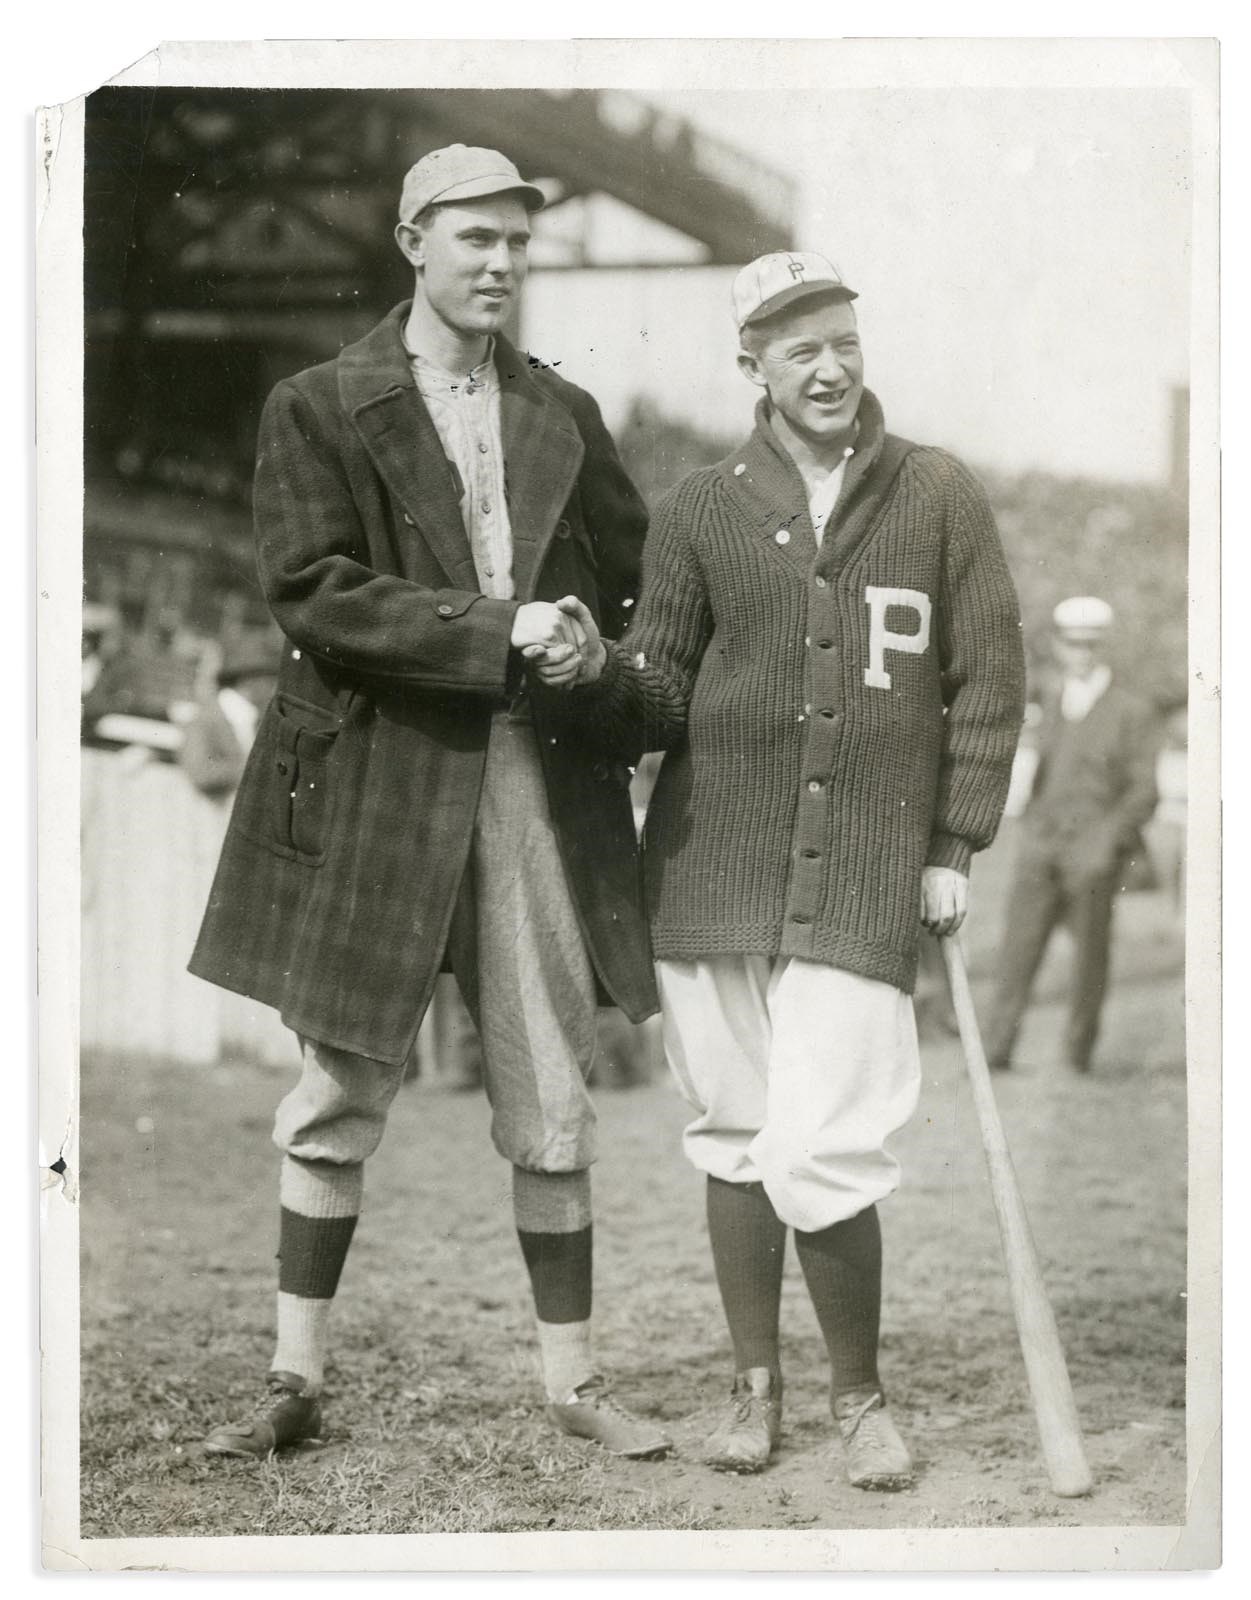 - Circa 1910-19 Grover Cleveland Alexander and Eddie Shore, by Paul Thompson